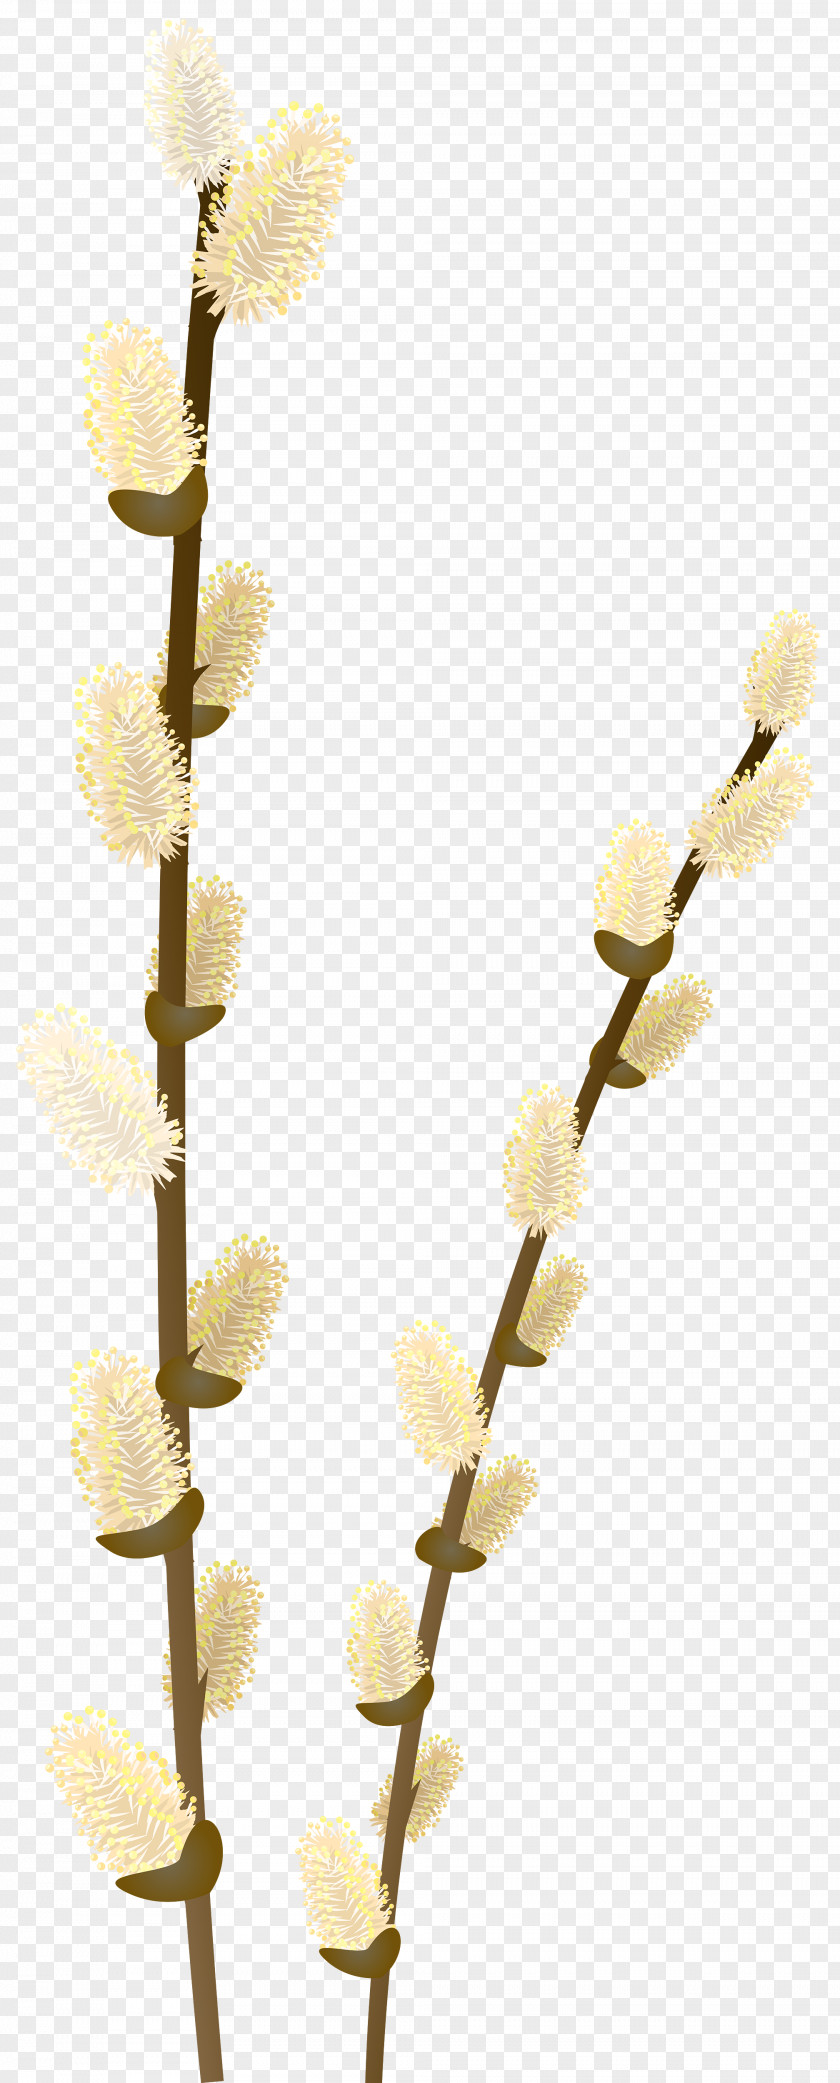 Willow Tree Branch Transparent Clip Art Image Weeping PNG